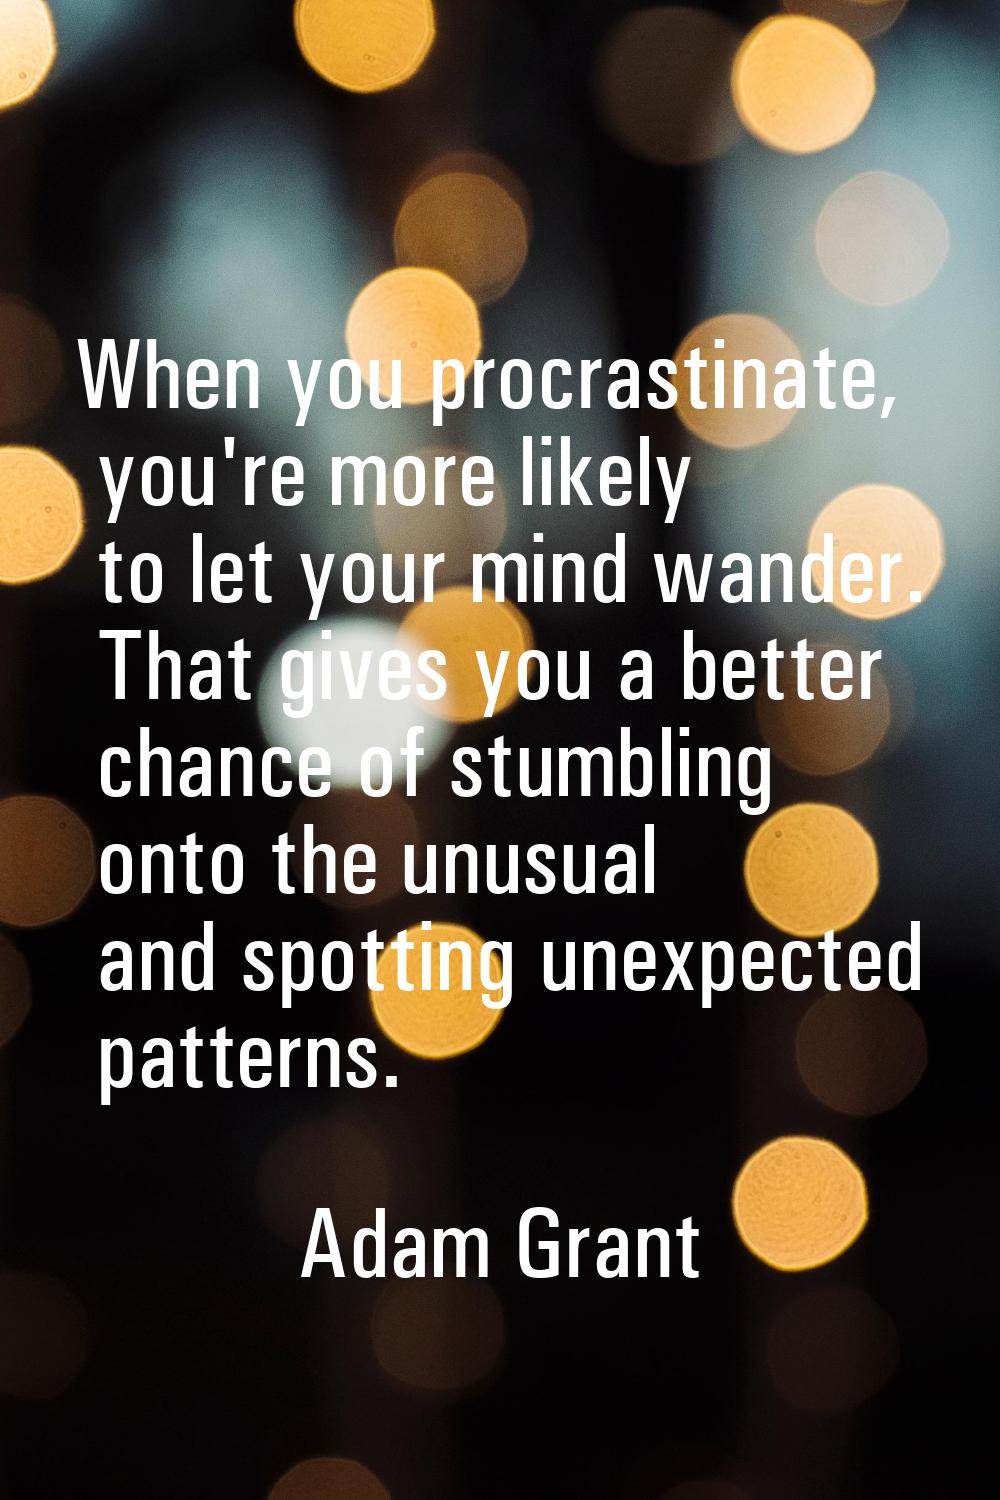 When you procrastinate, you're more likely to let your mind wander. That gives you a better chance 